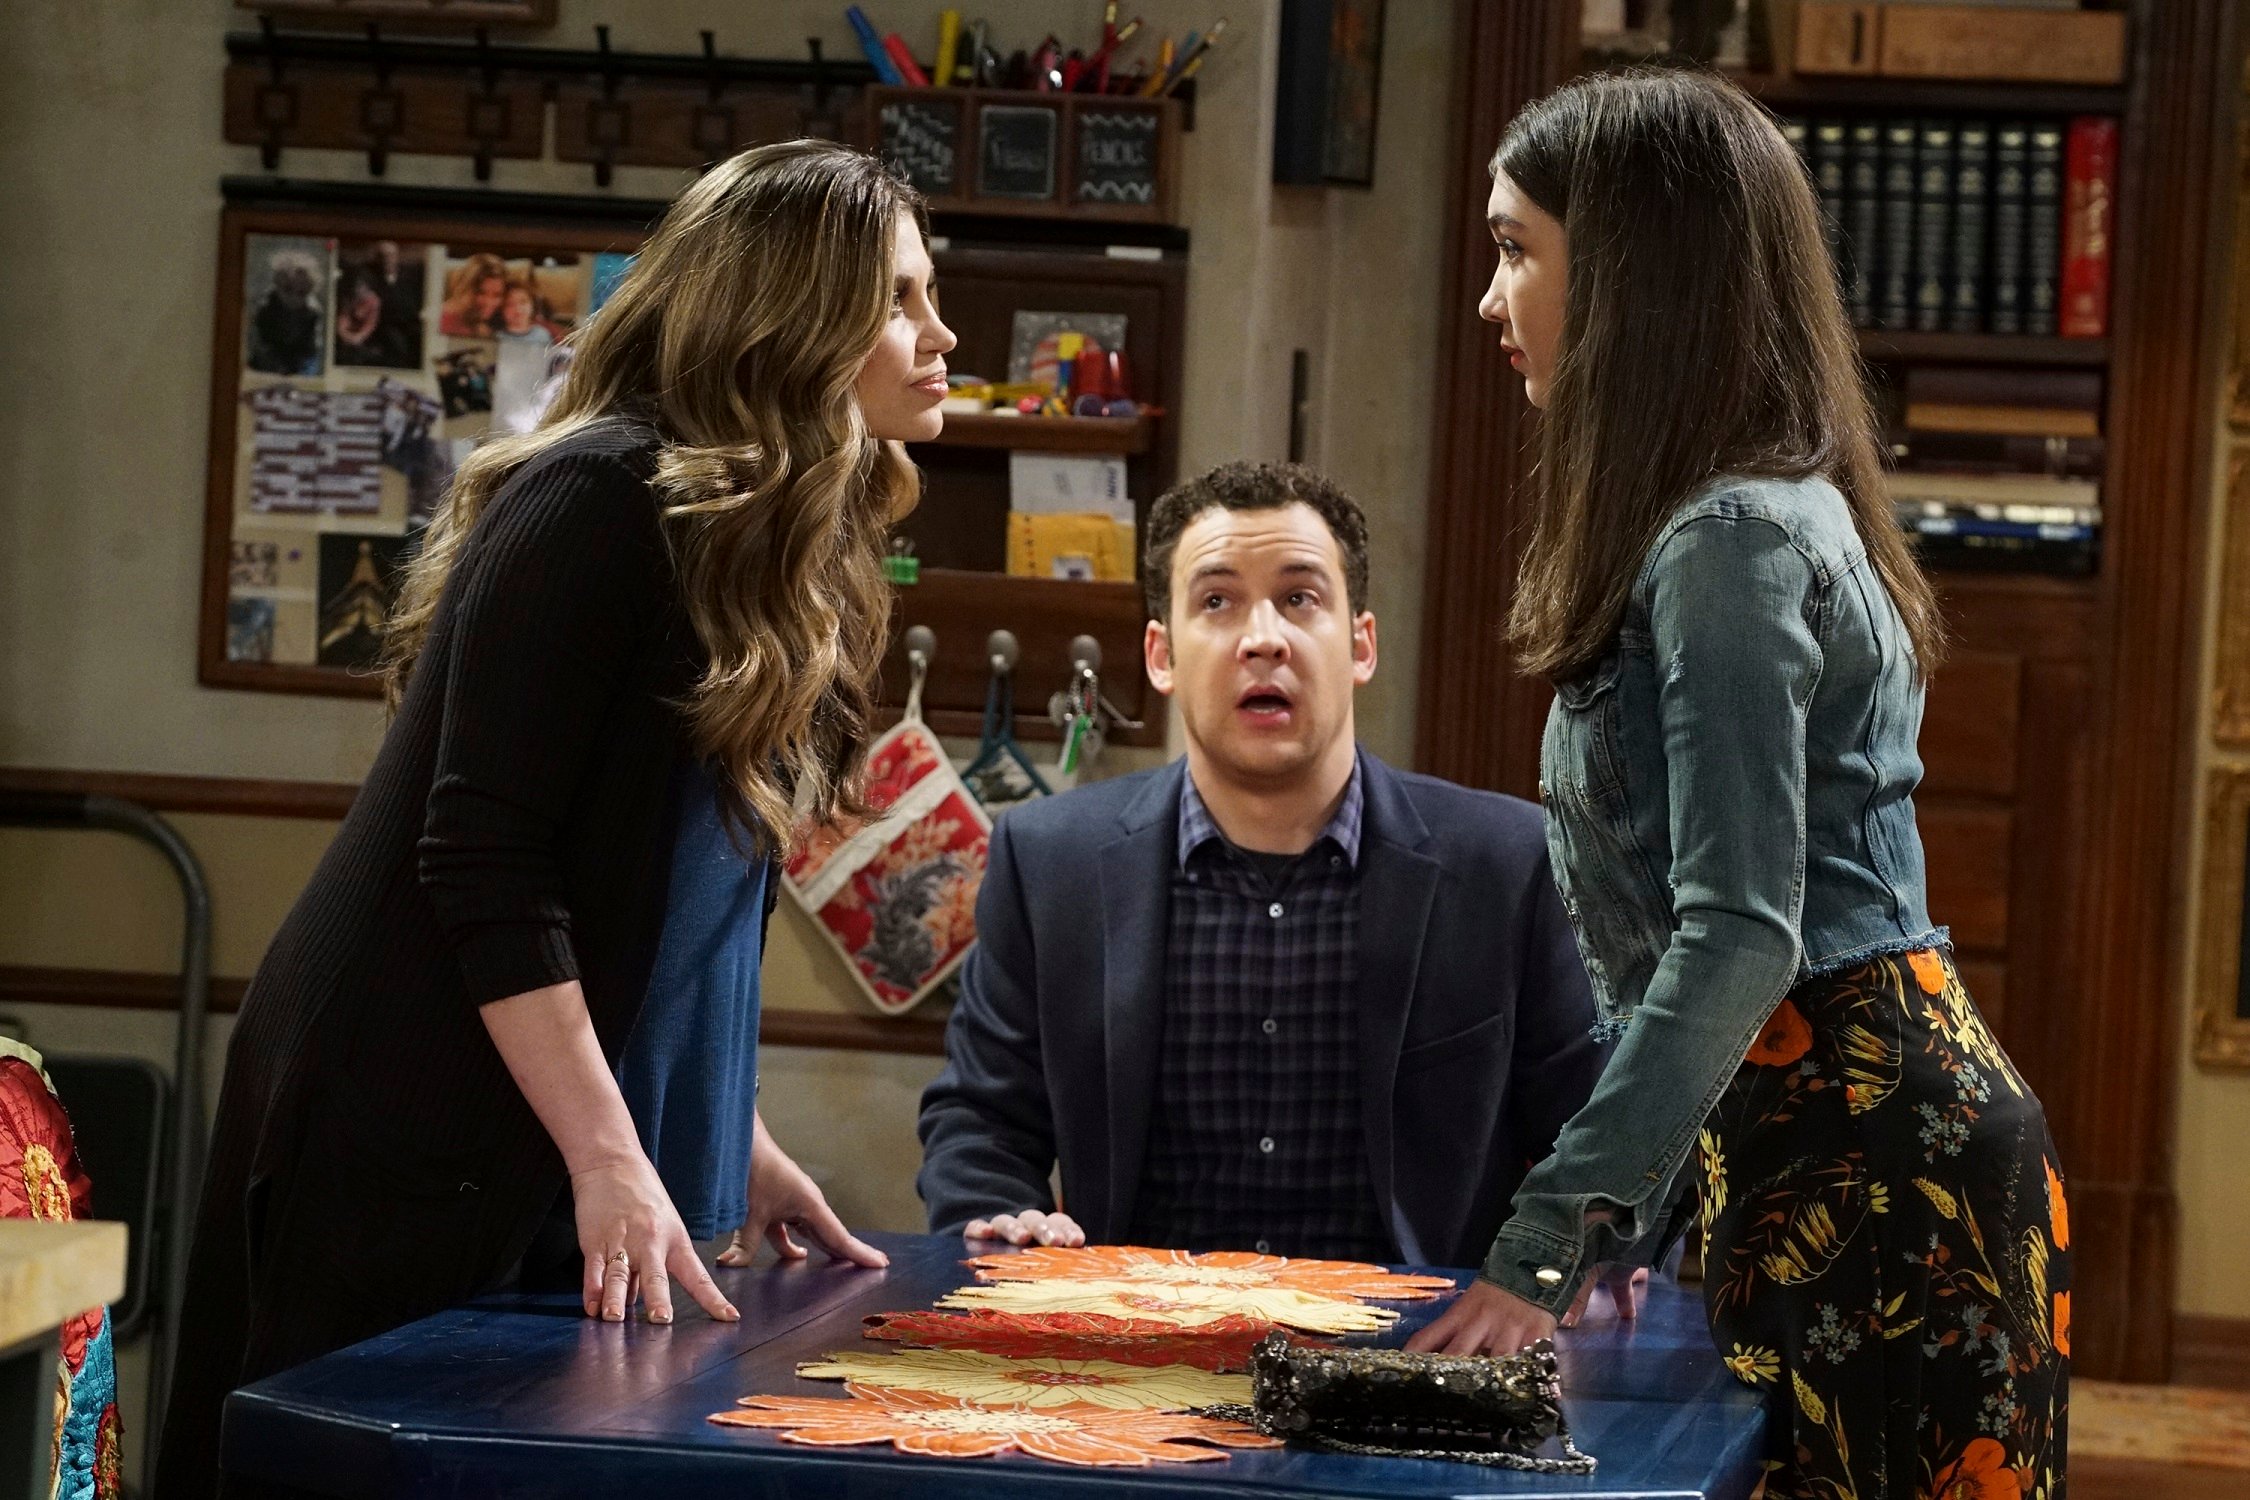 Danielle Fishel as Topanga and Rowan Blanchard as Riley argue at the table while Ben Savage as Cory stands by in 'Girl Meets World'